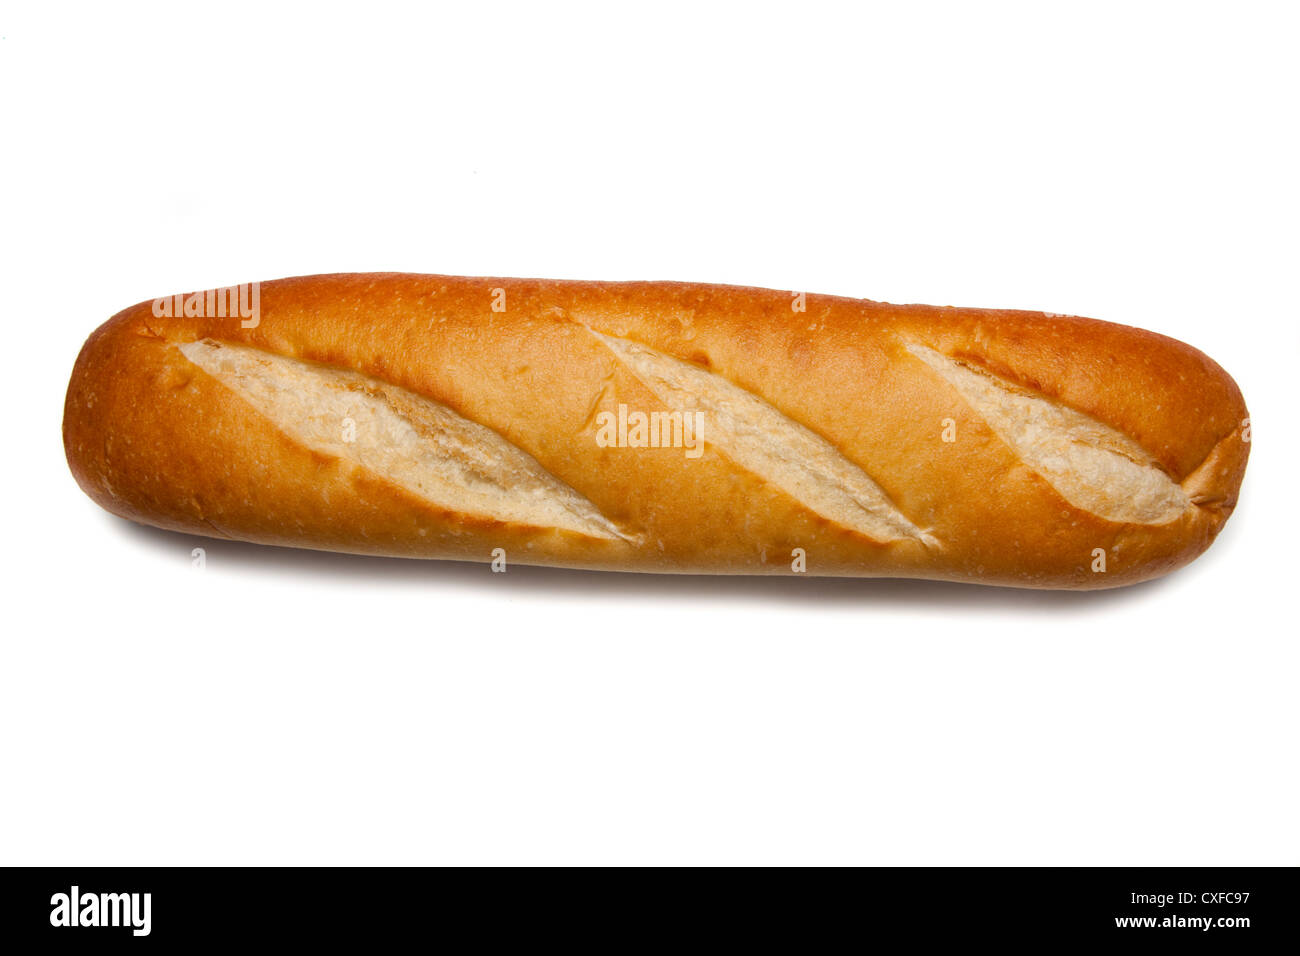 Loaf of French bread Stock Photo